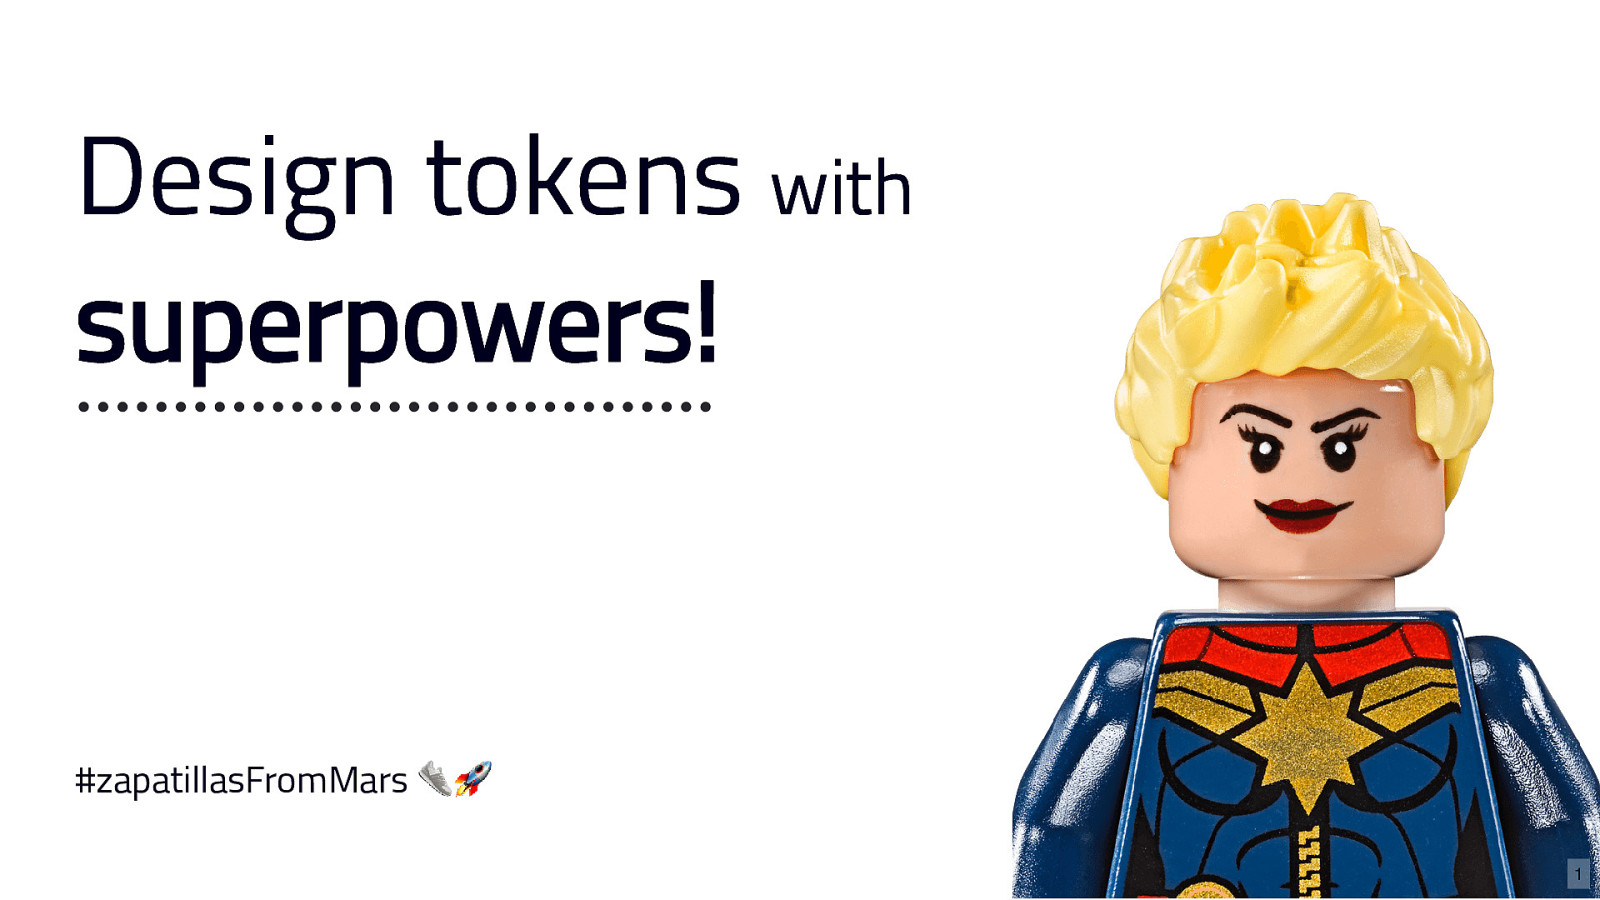 Design tokens with superpowers!